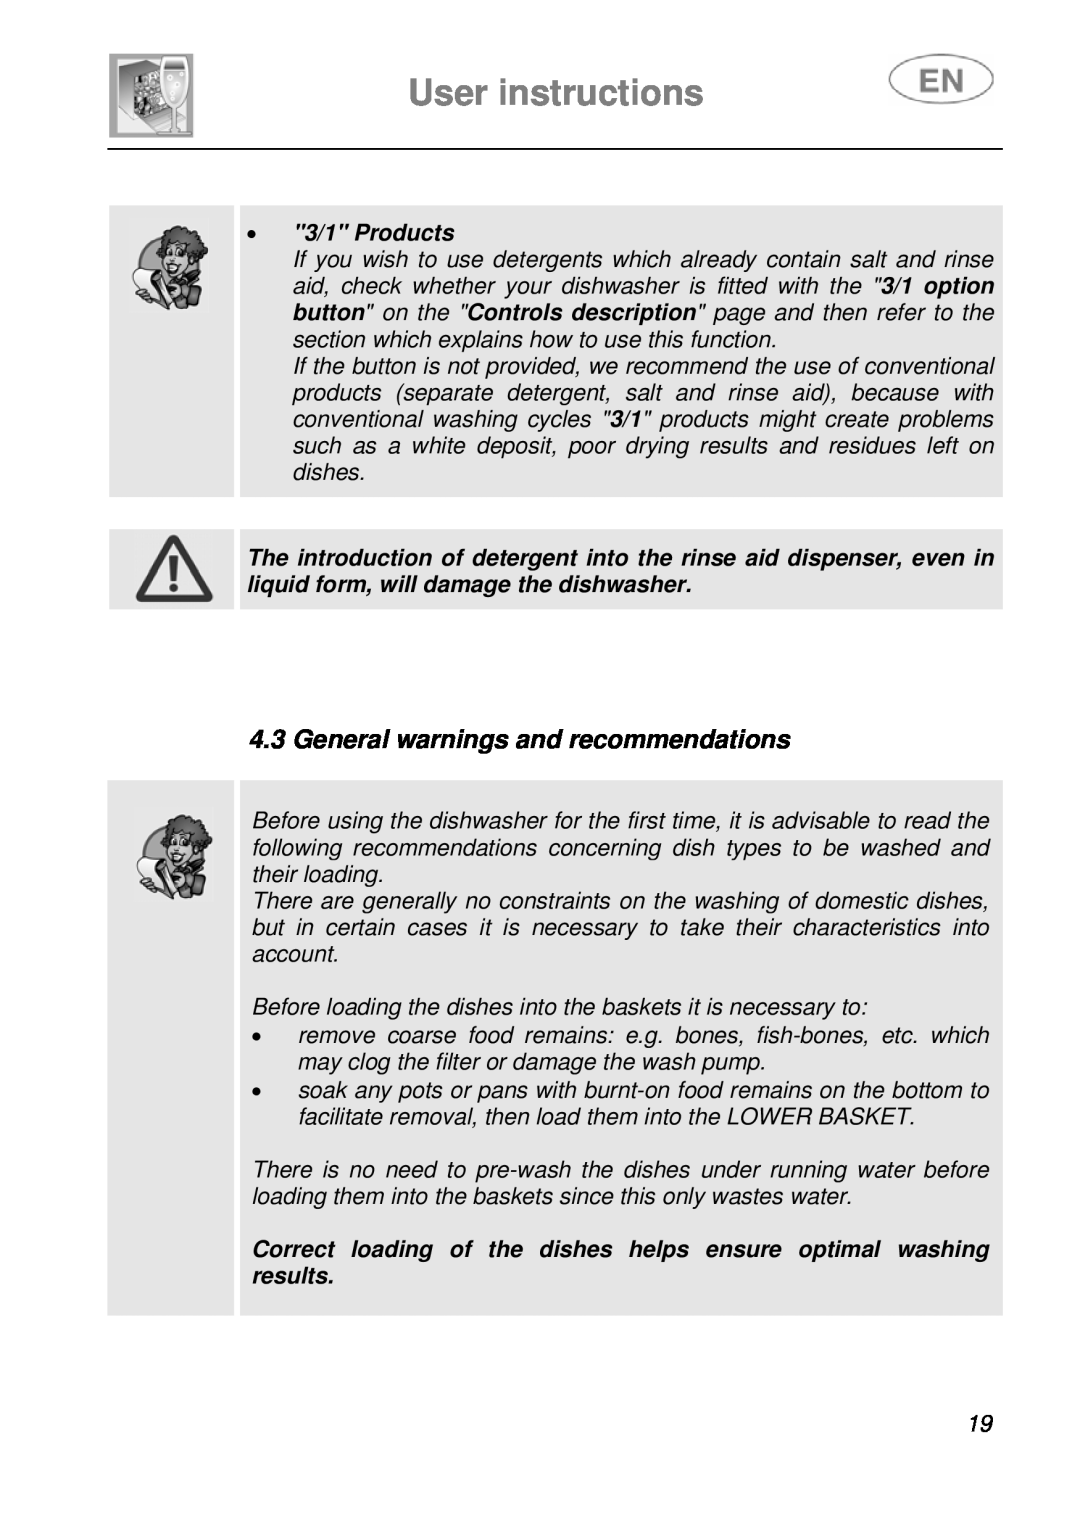 Smeg ST4108 manual General warnings and recommendations, User instructions, 3/1 Products 